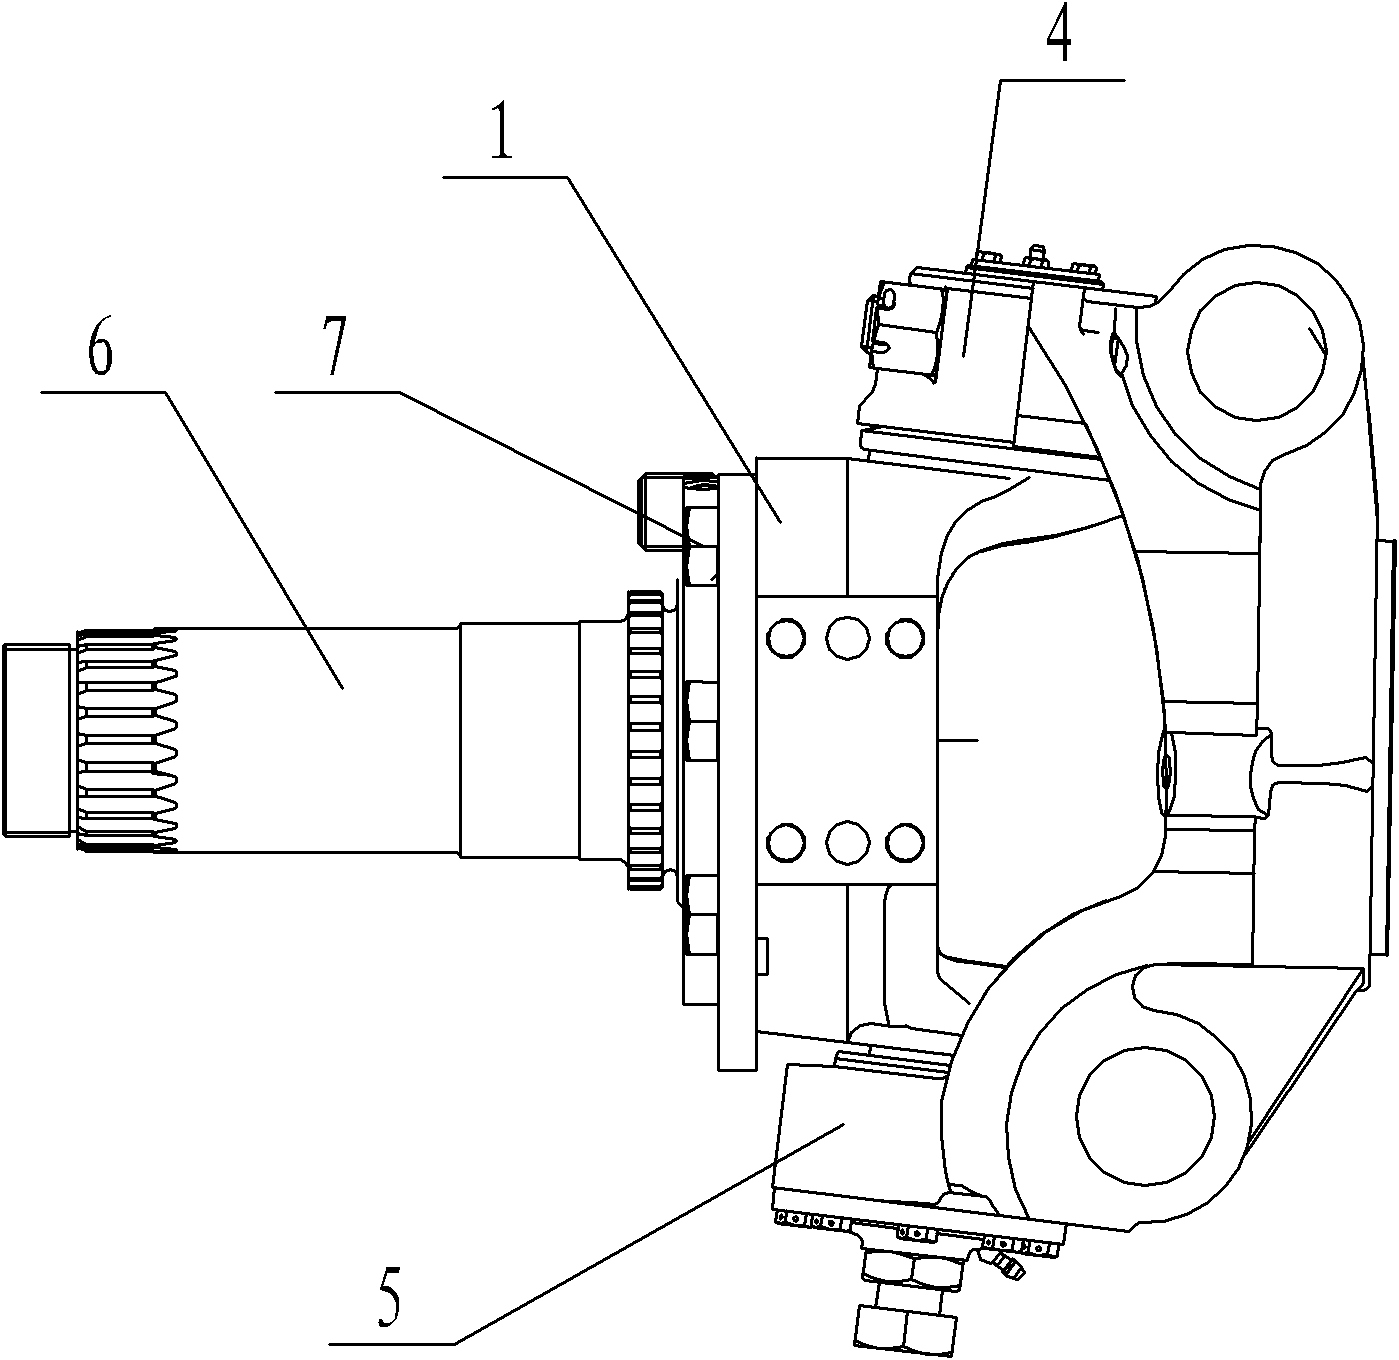 Novel front axle steering knuckle assembly device